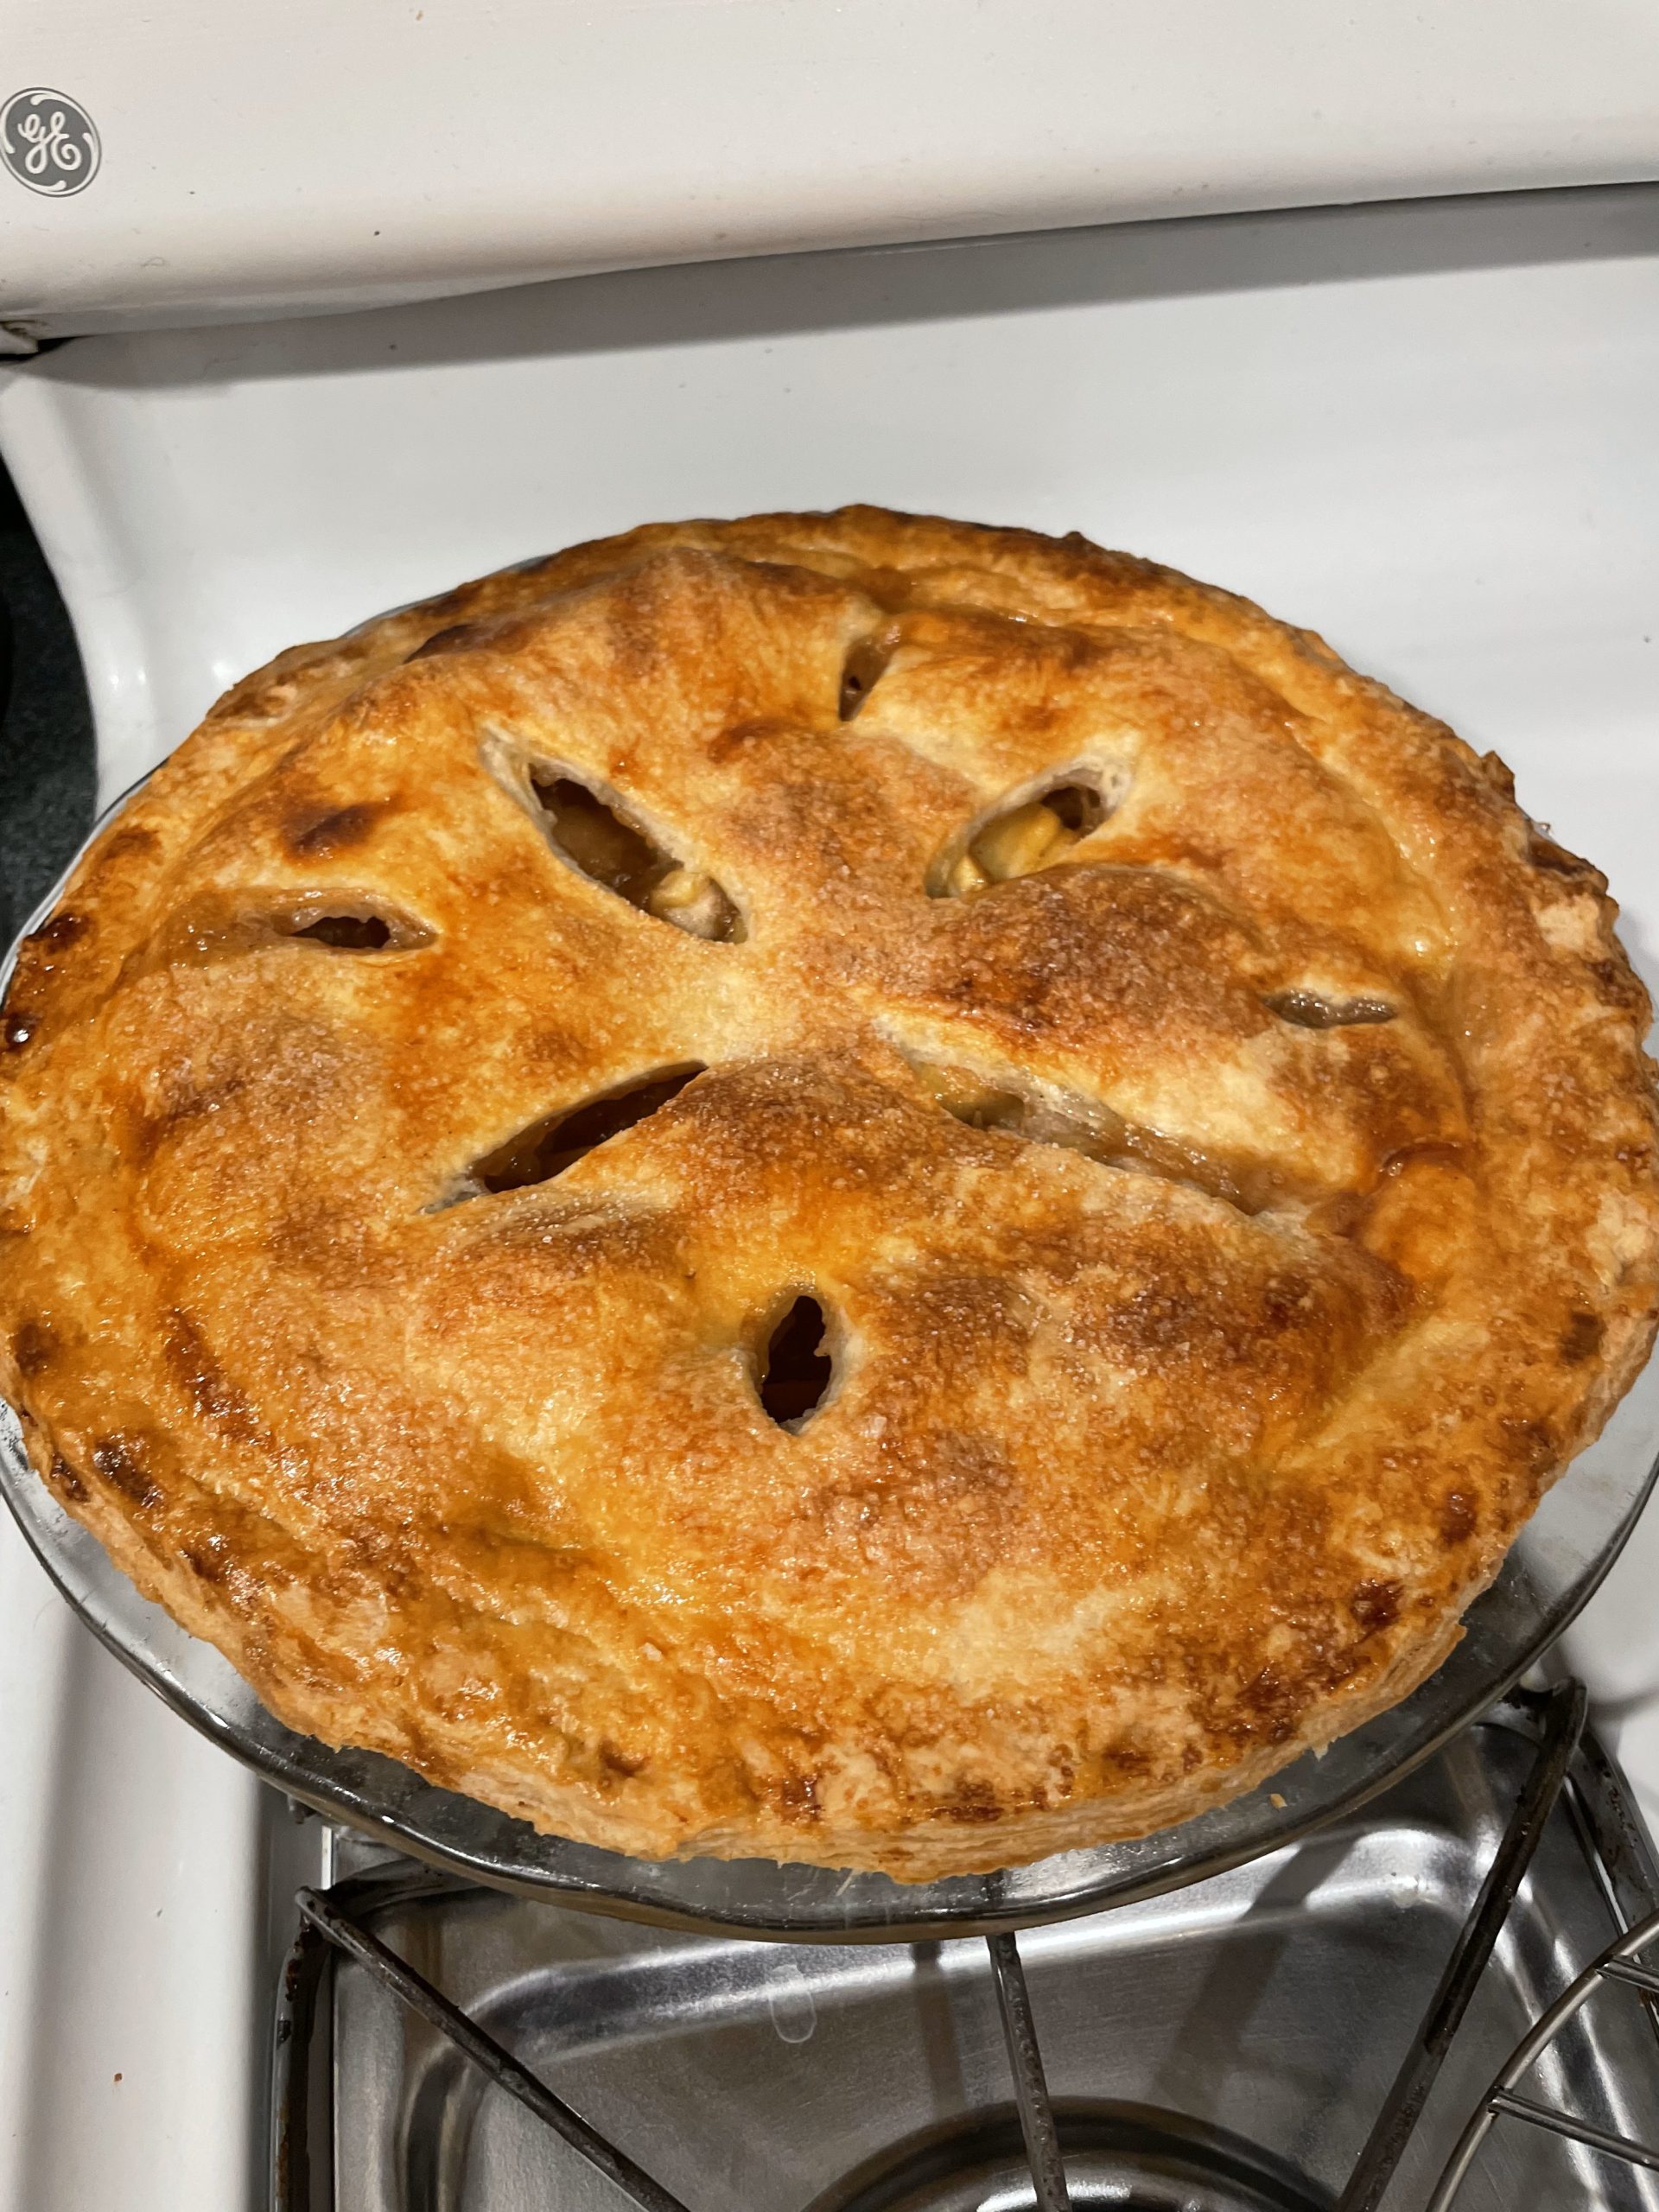 A baked apple pie sitting on a white stove